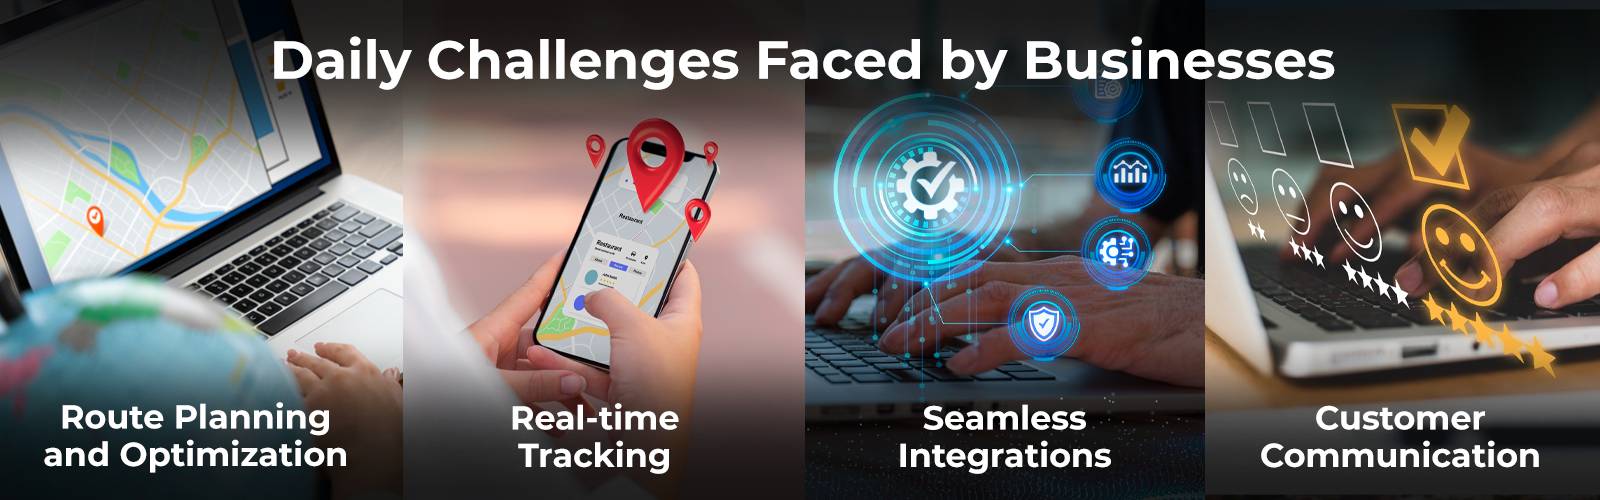 Daily challenges faced by delivery businesses for logistics inefficiency